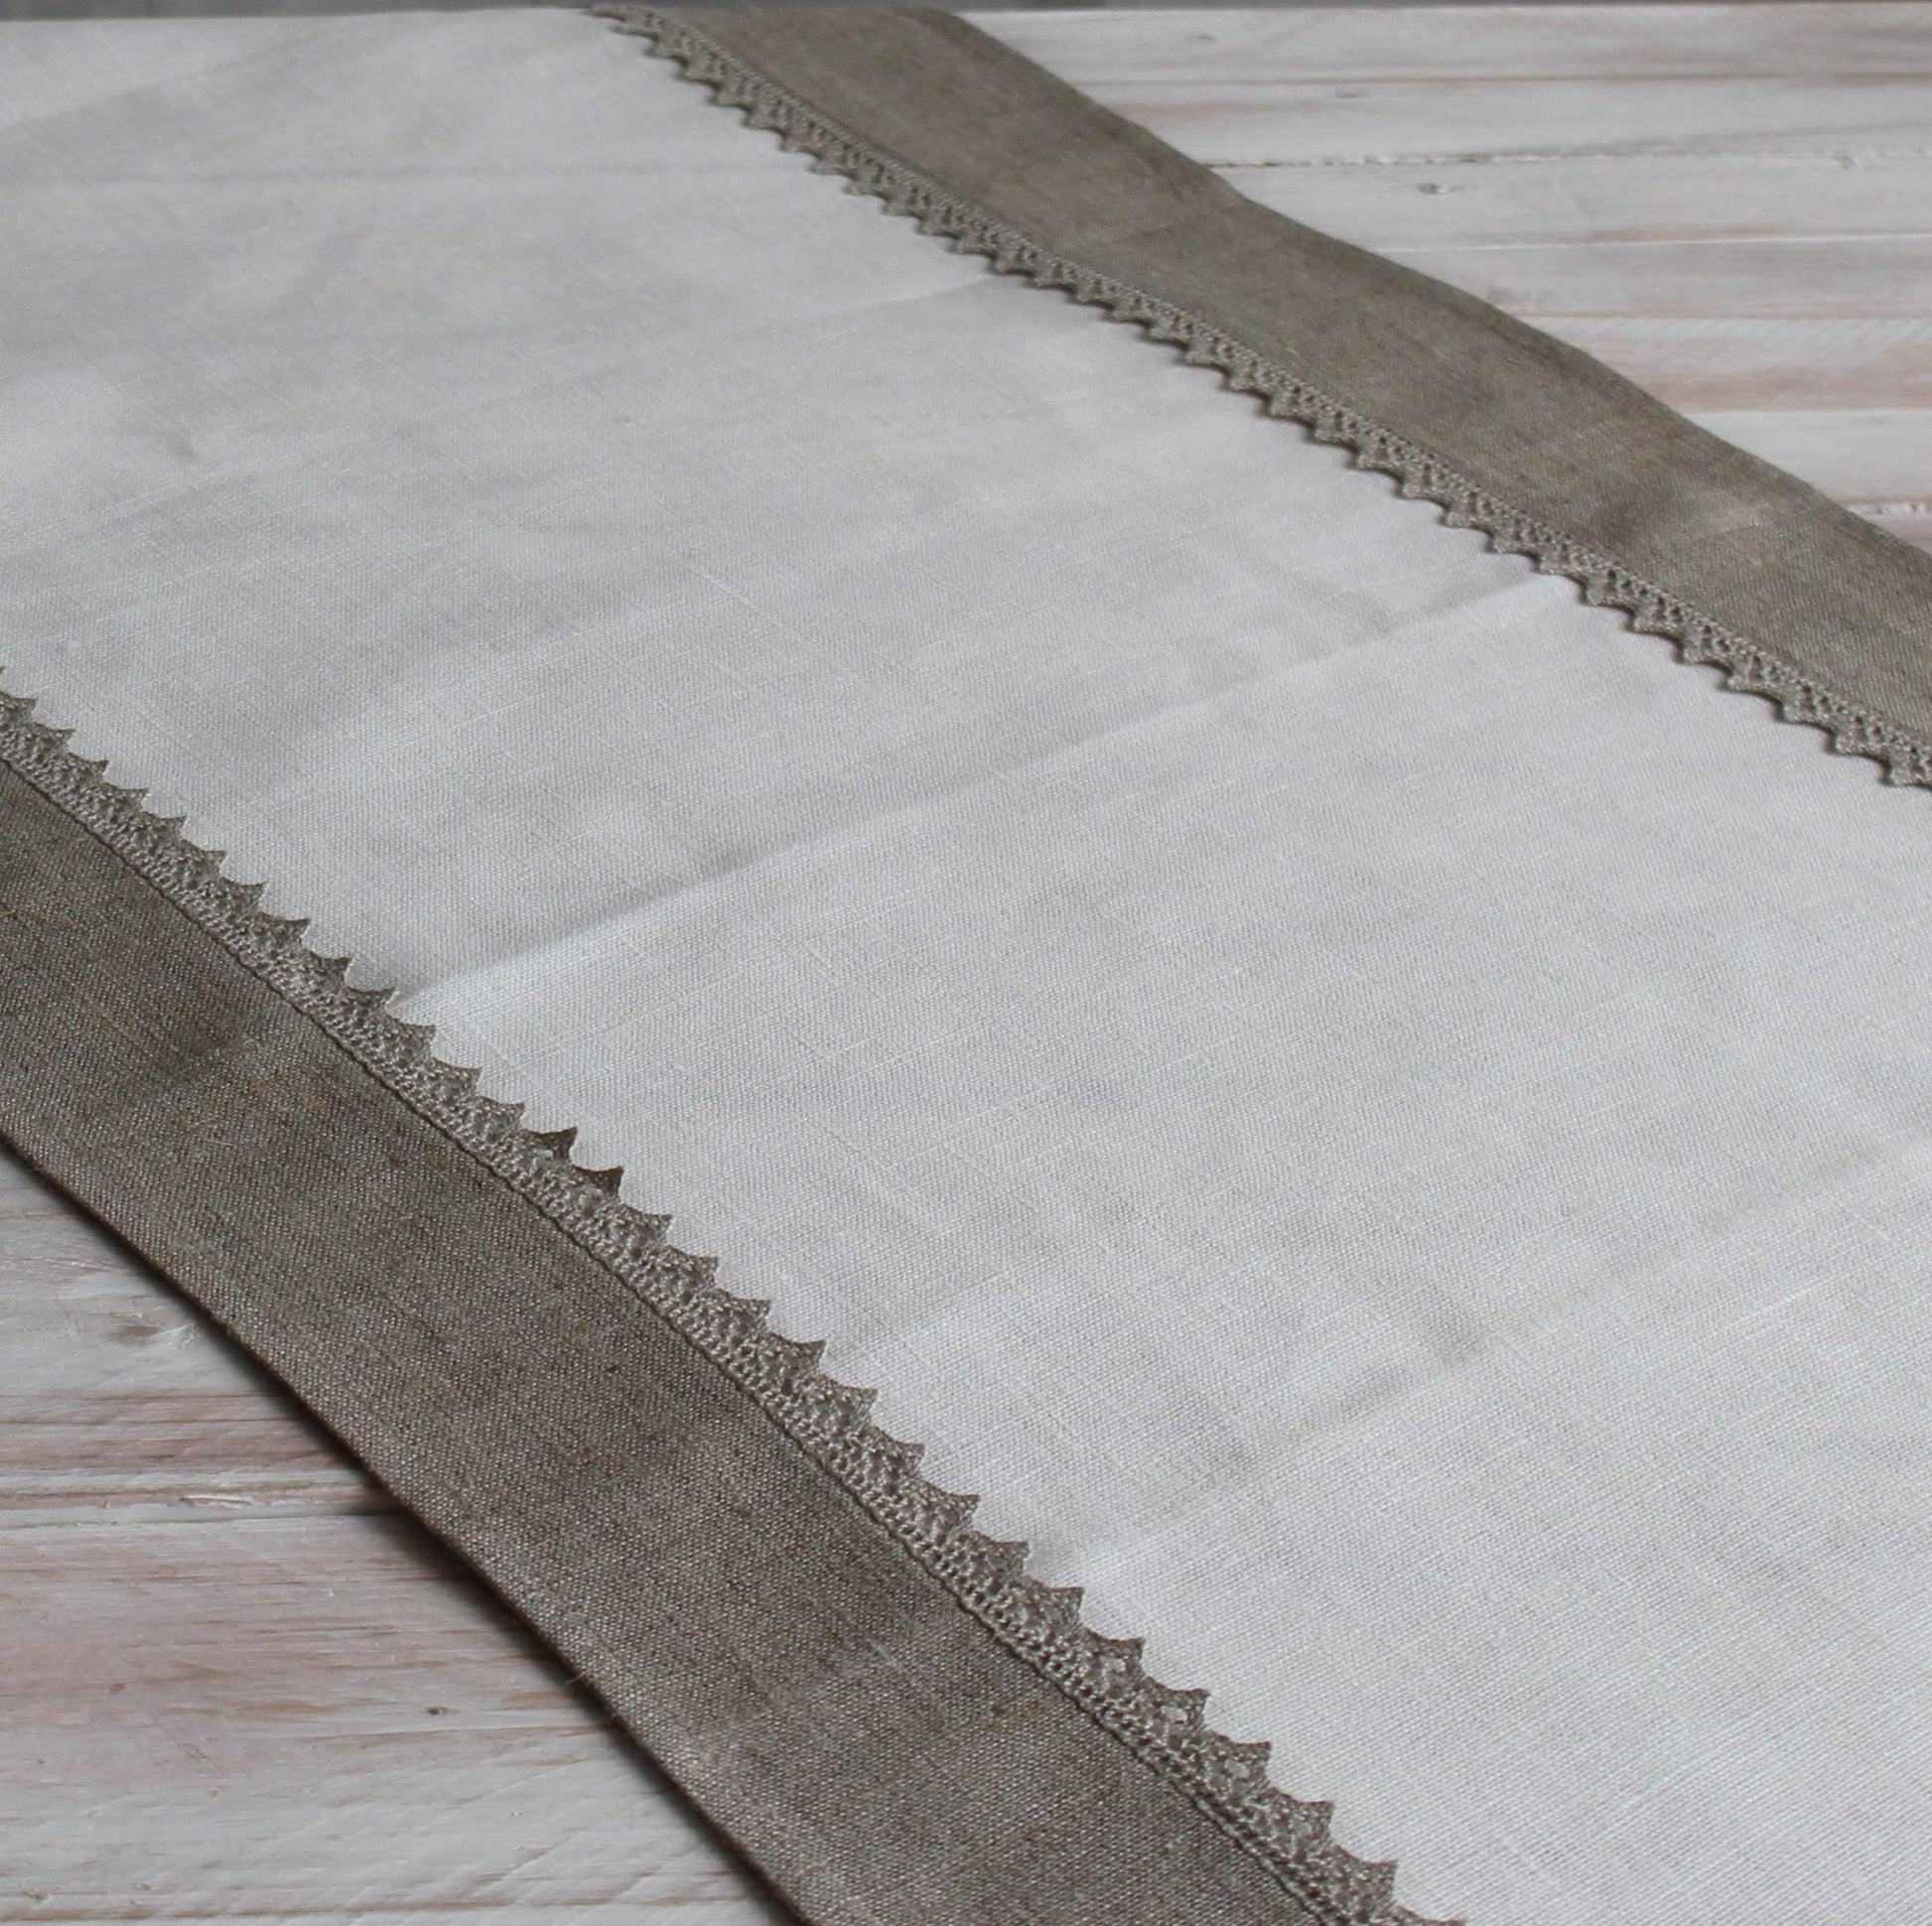 Table runner with lace NATALIE - Linen4me